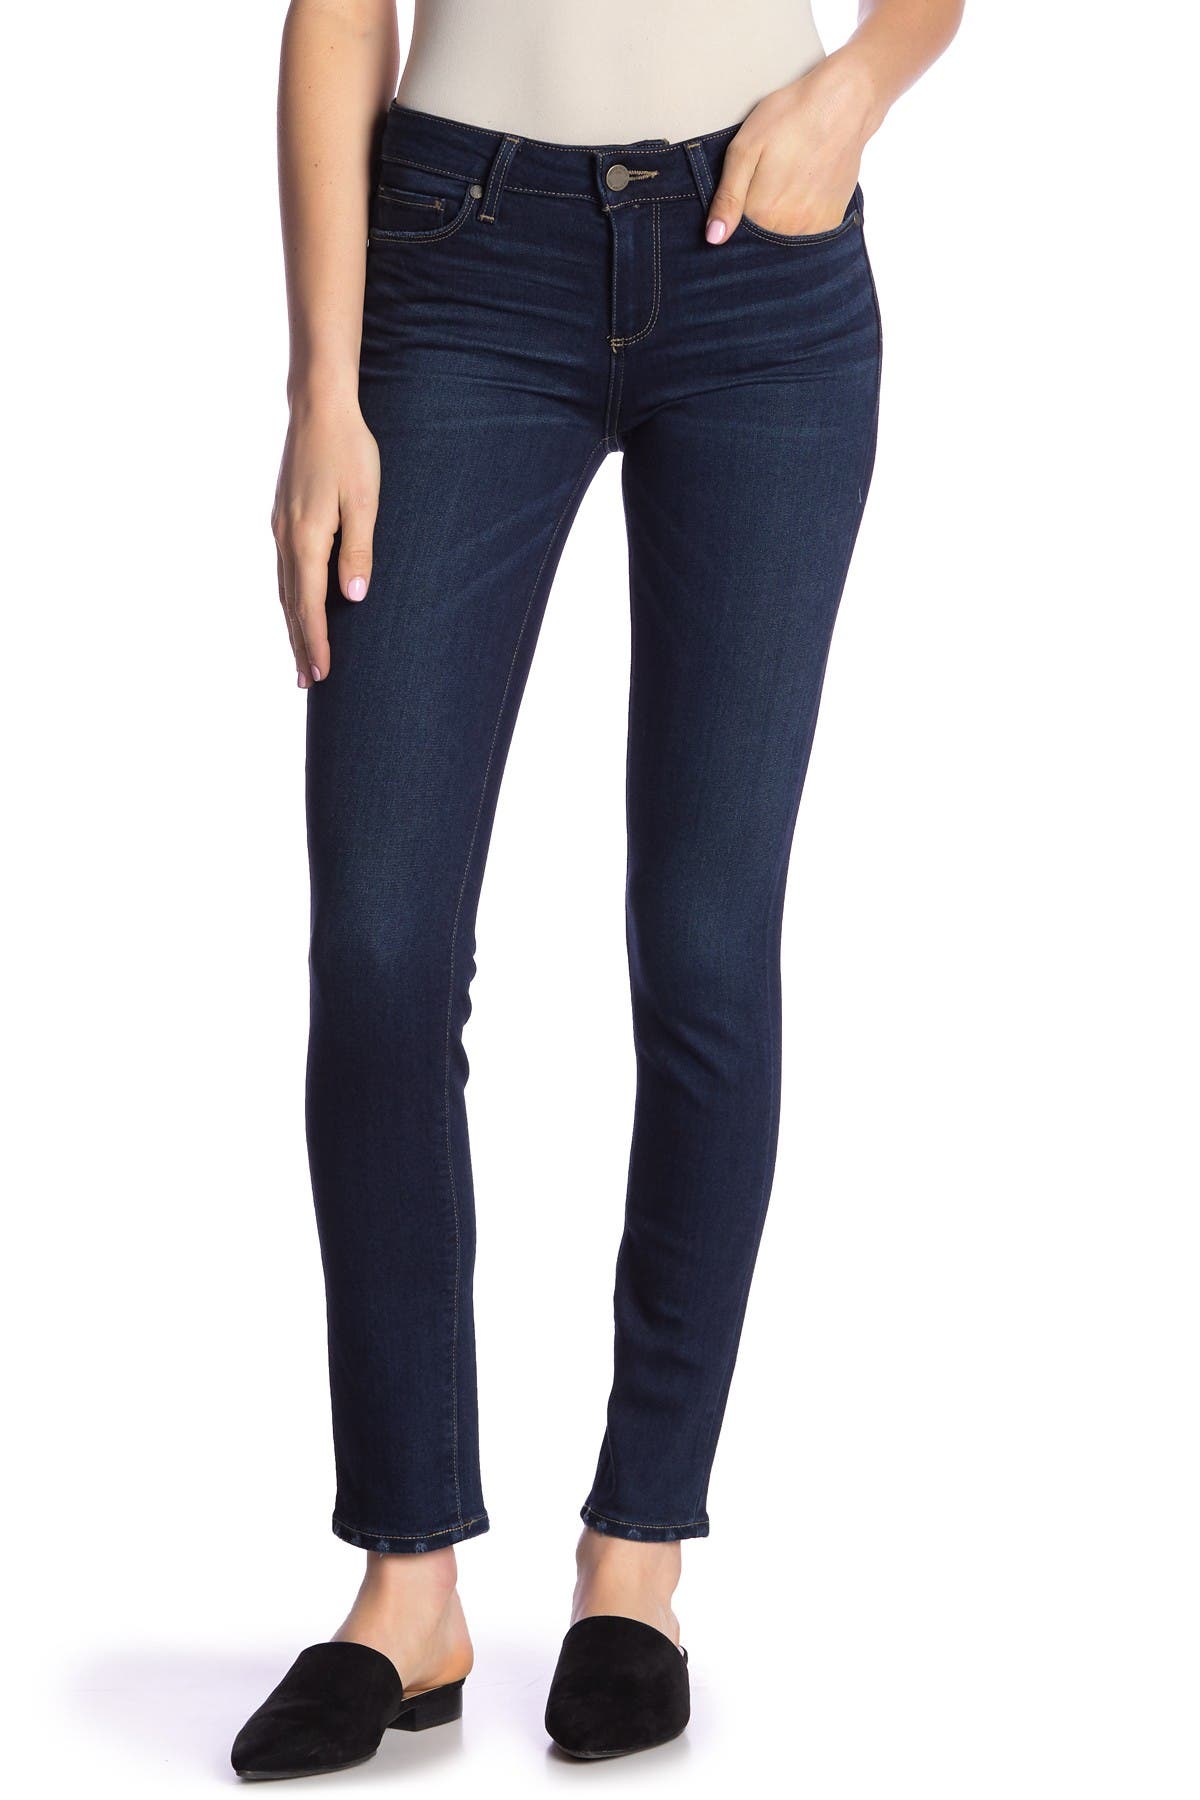 nordstrom paige jeans womens